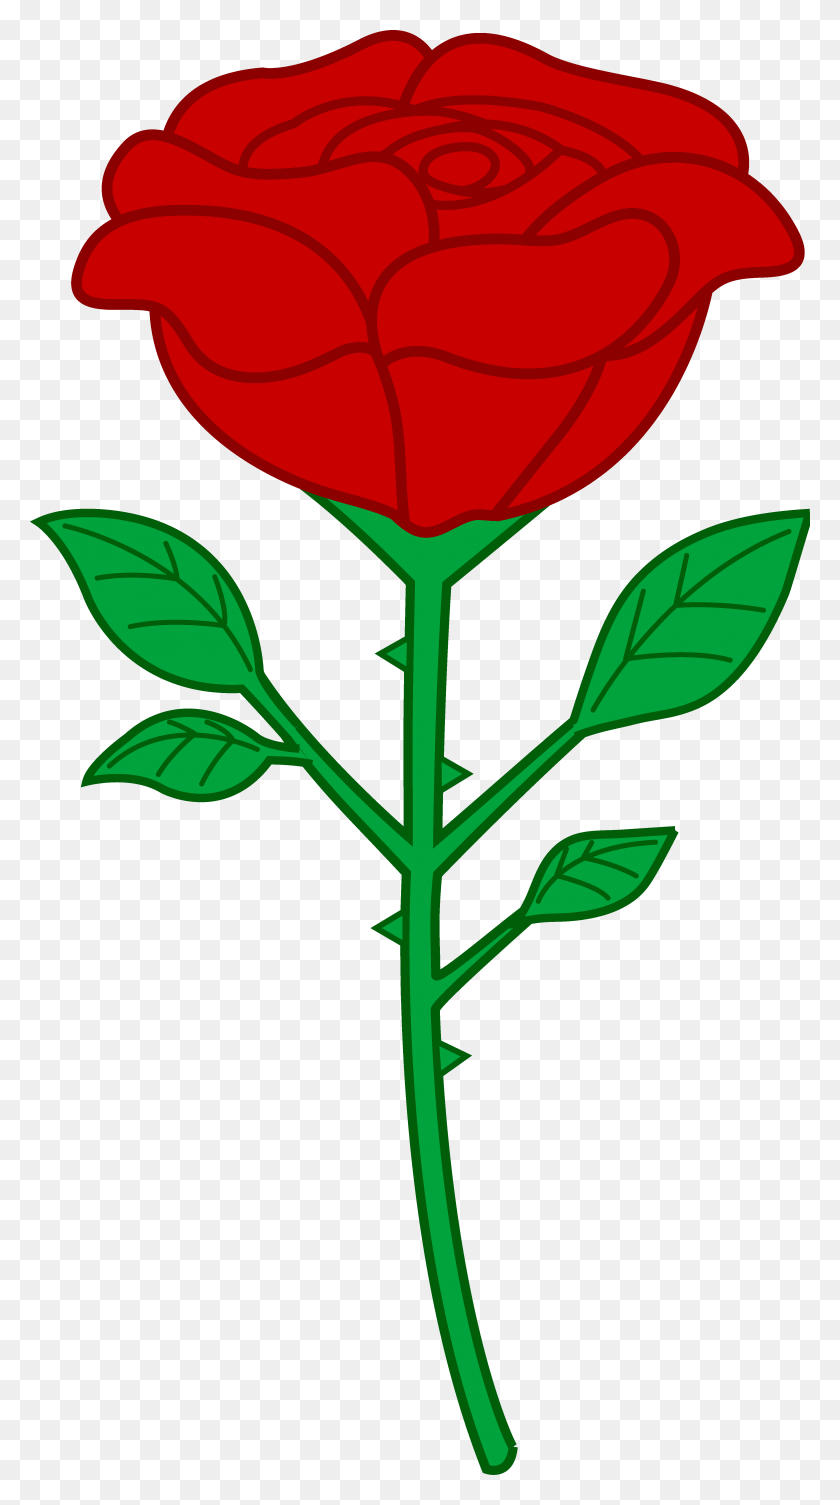 3906x7240 Simple Rose Clipart Free Clipart Image - Freddy Krueger Clipart